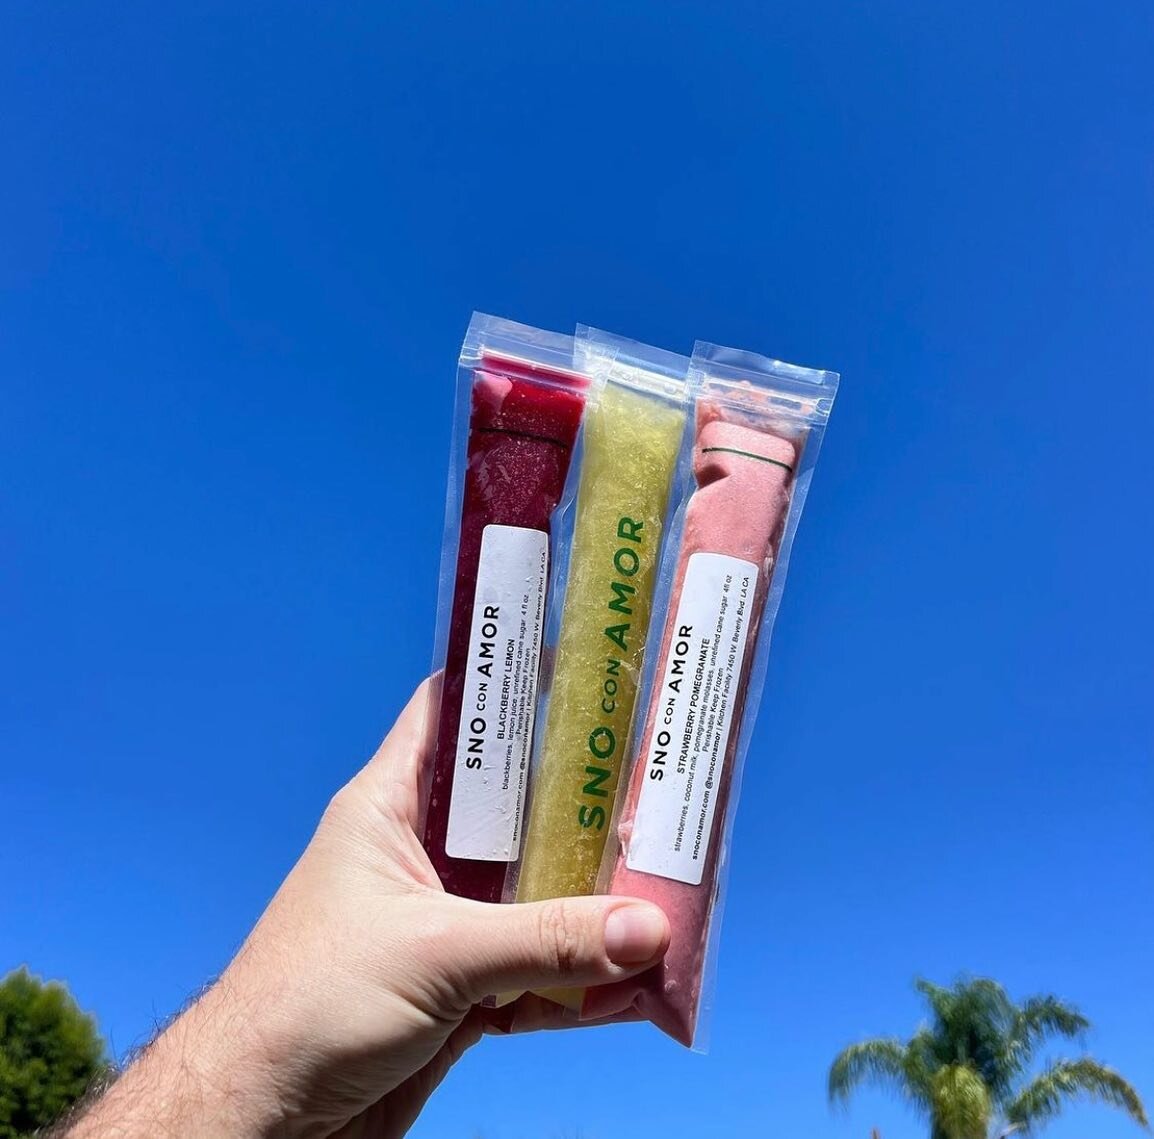 Repost from @altadenabev: &ldquo;No thoughts, just want cold treats 🥵🌞

We got a lovely restock from @snoconamor and we&rsquo;re open until 7pm today&rdquo;
.
.
.
.
.
#altadenabeverage #summertime #goodvibes #snopops #icepops #allnaturalingredients